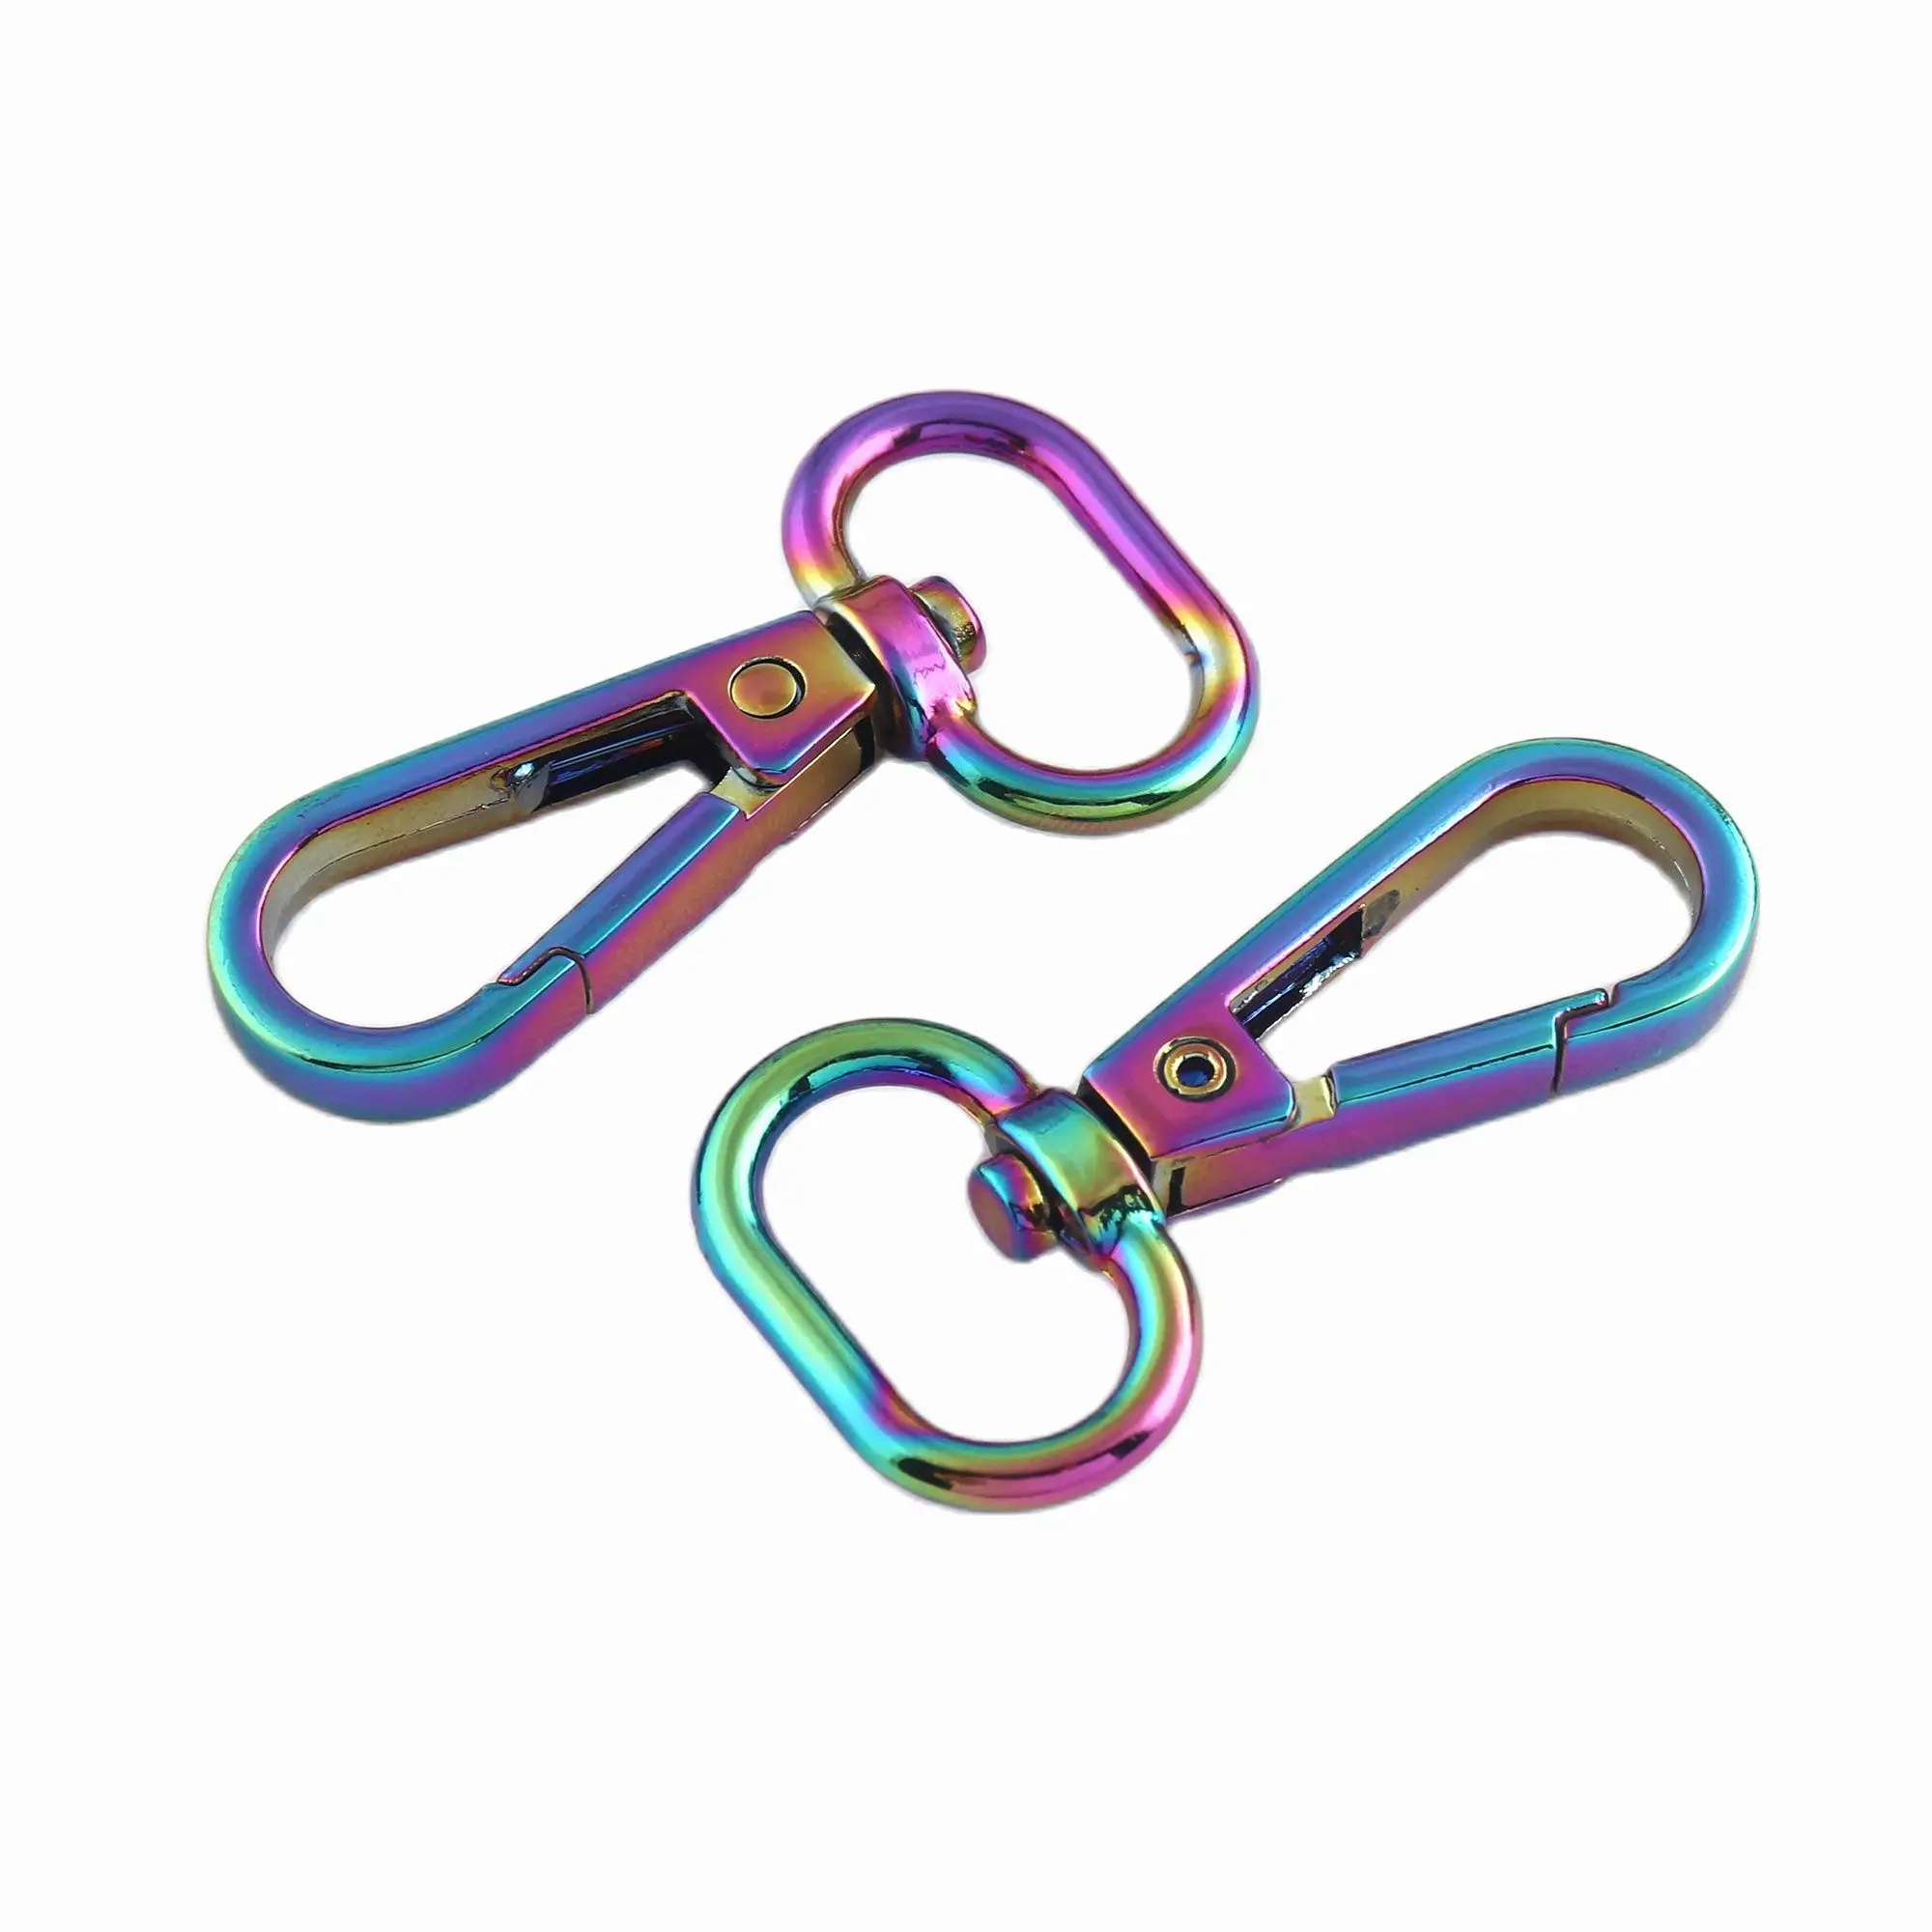 

Swivel clasps rainbow Swivel Snap Hooks Lobster Clasp Claw Push Gate Trigger Clasps Oval Ring For key or backpack handbag 4pcs